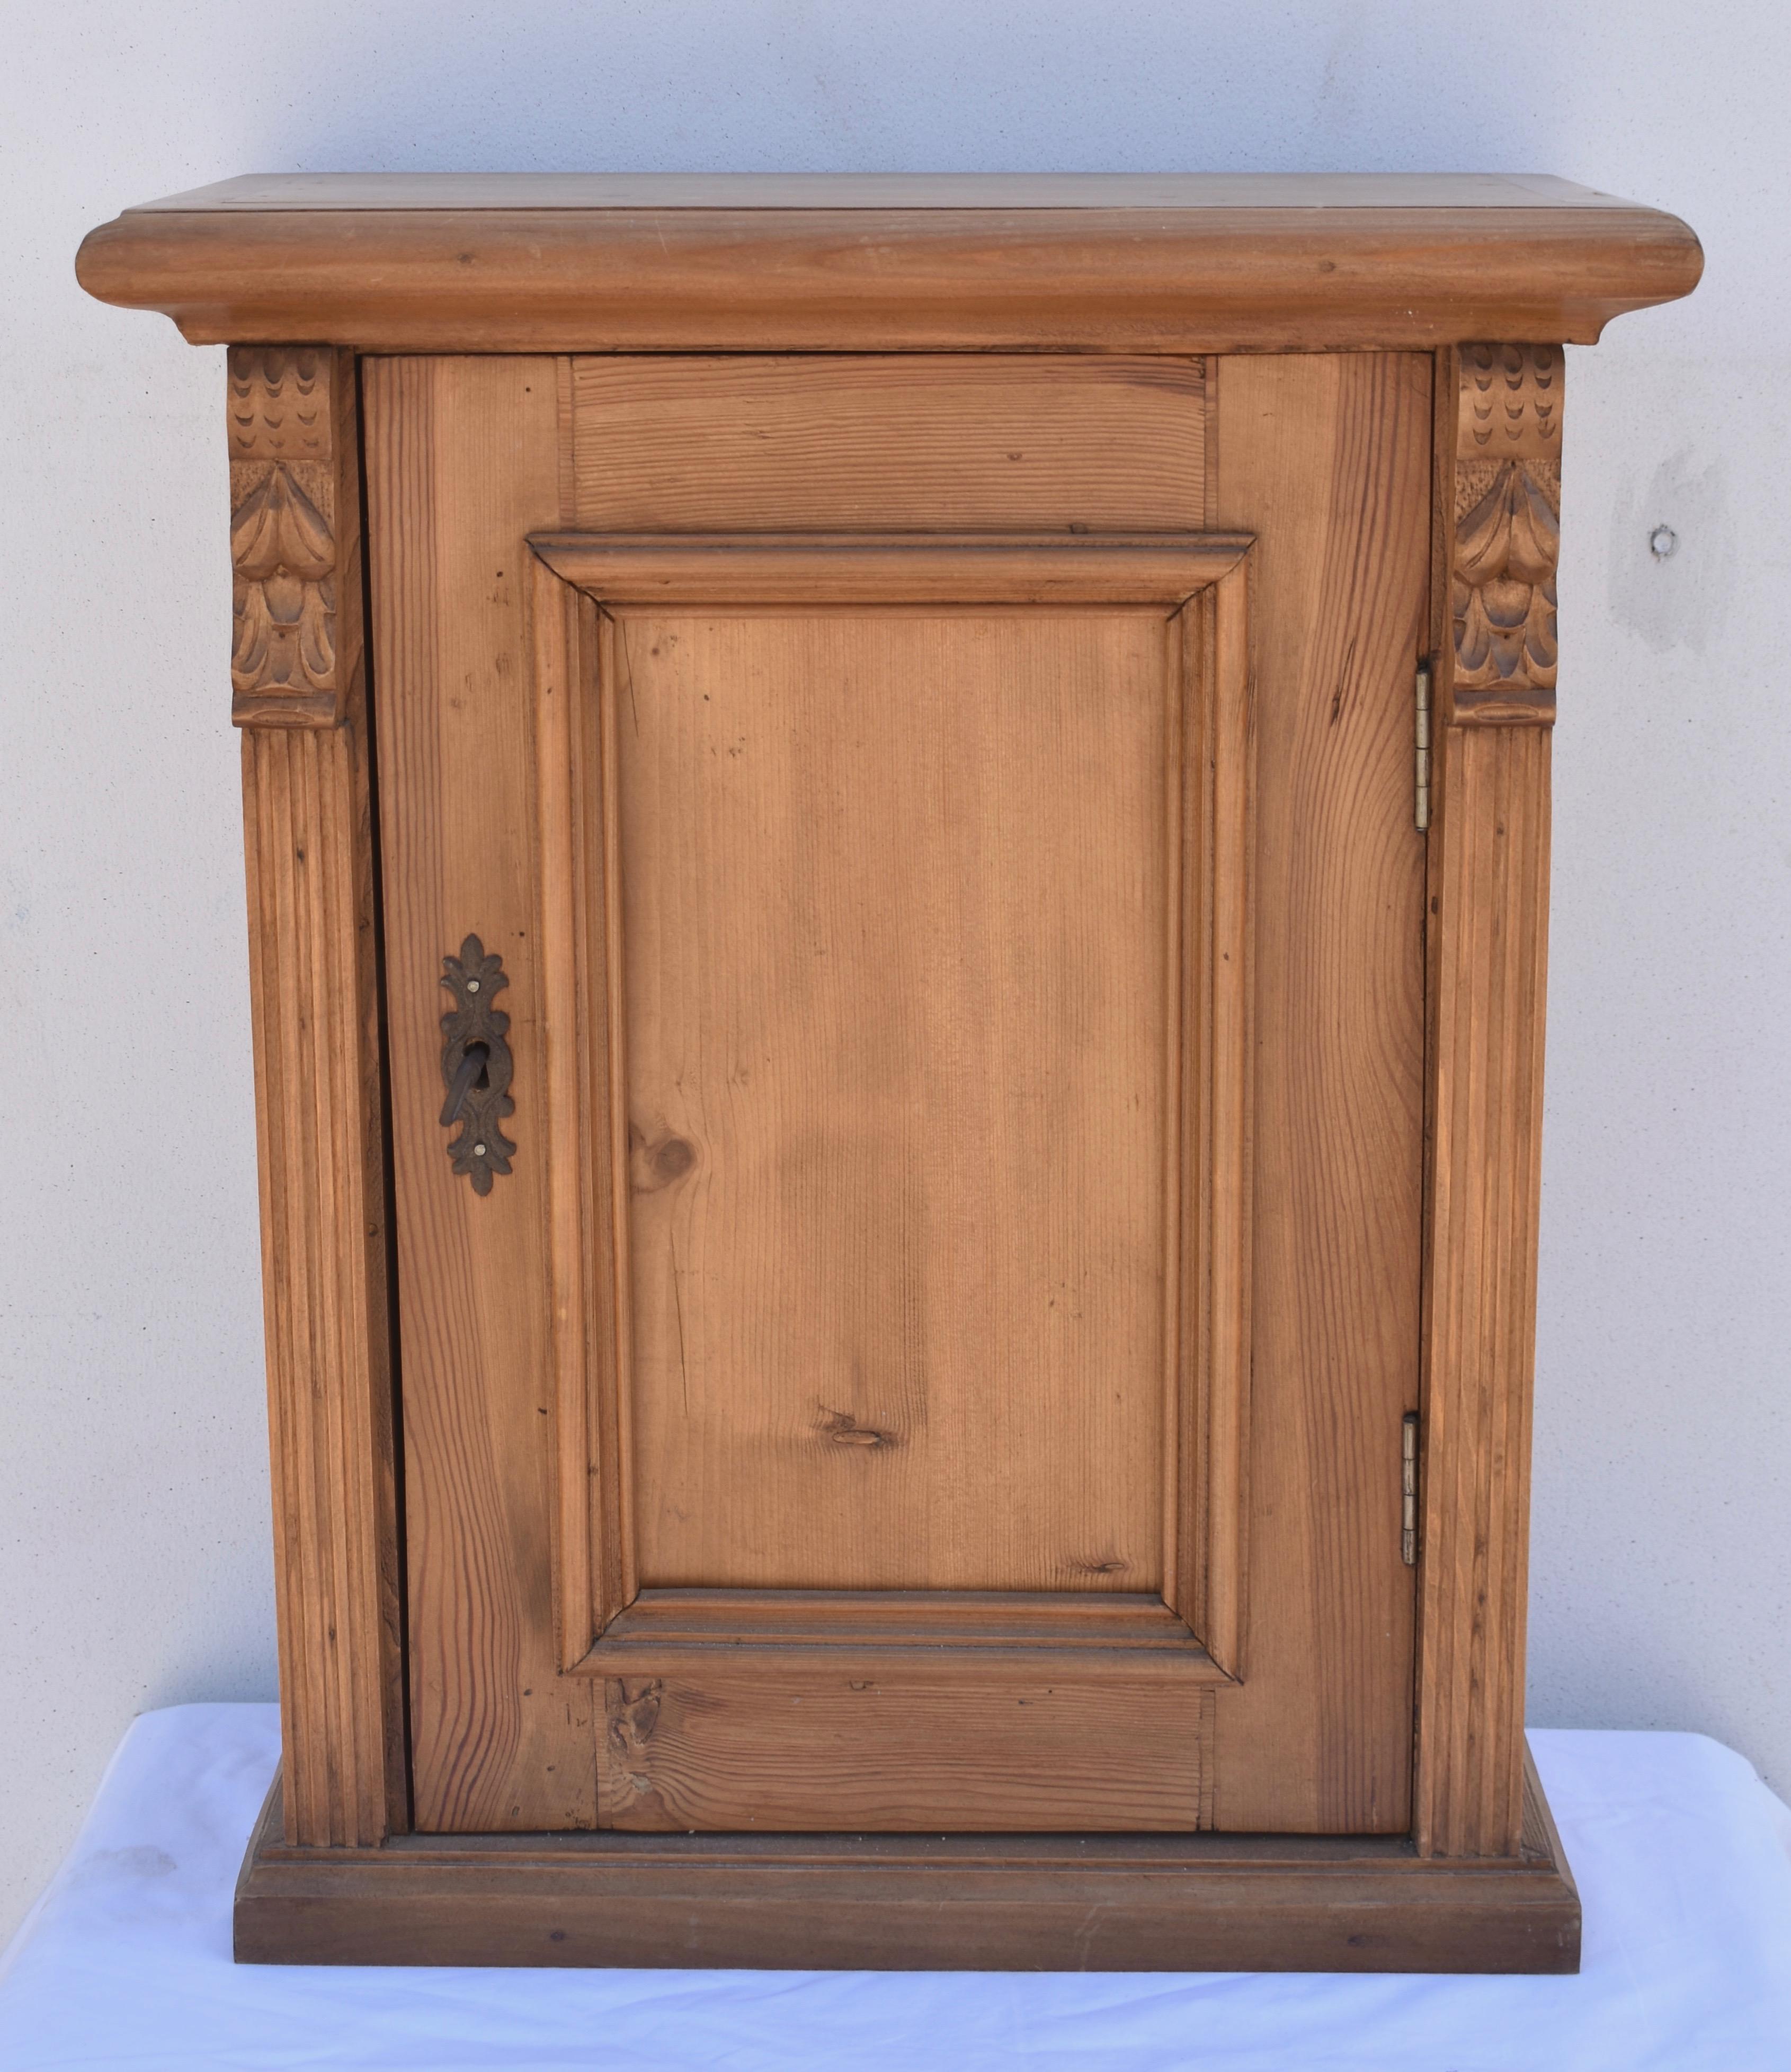 Antique pine hanging cupboards can be hard to find. This pretty little example is constructed from reclaimed pine and has the appearance and detail of an antique piece. The paneled door is flanked by applied fluting and attractive corbels and opens